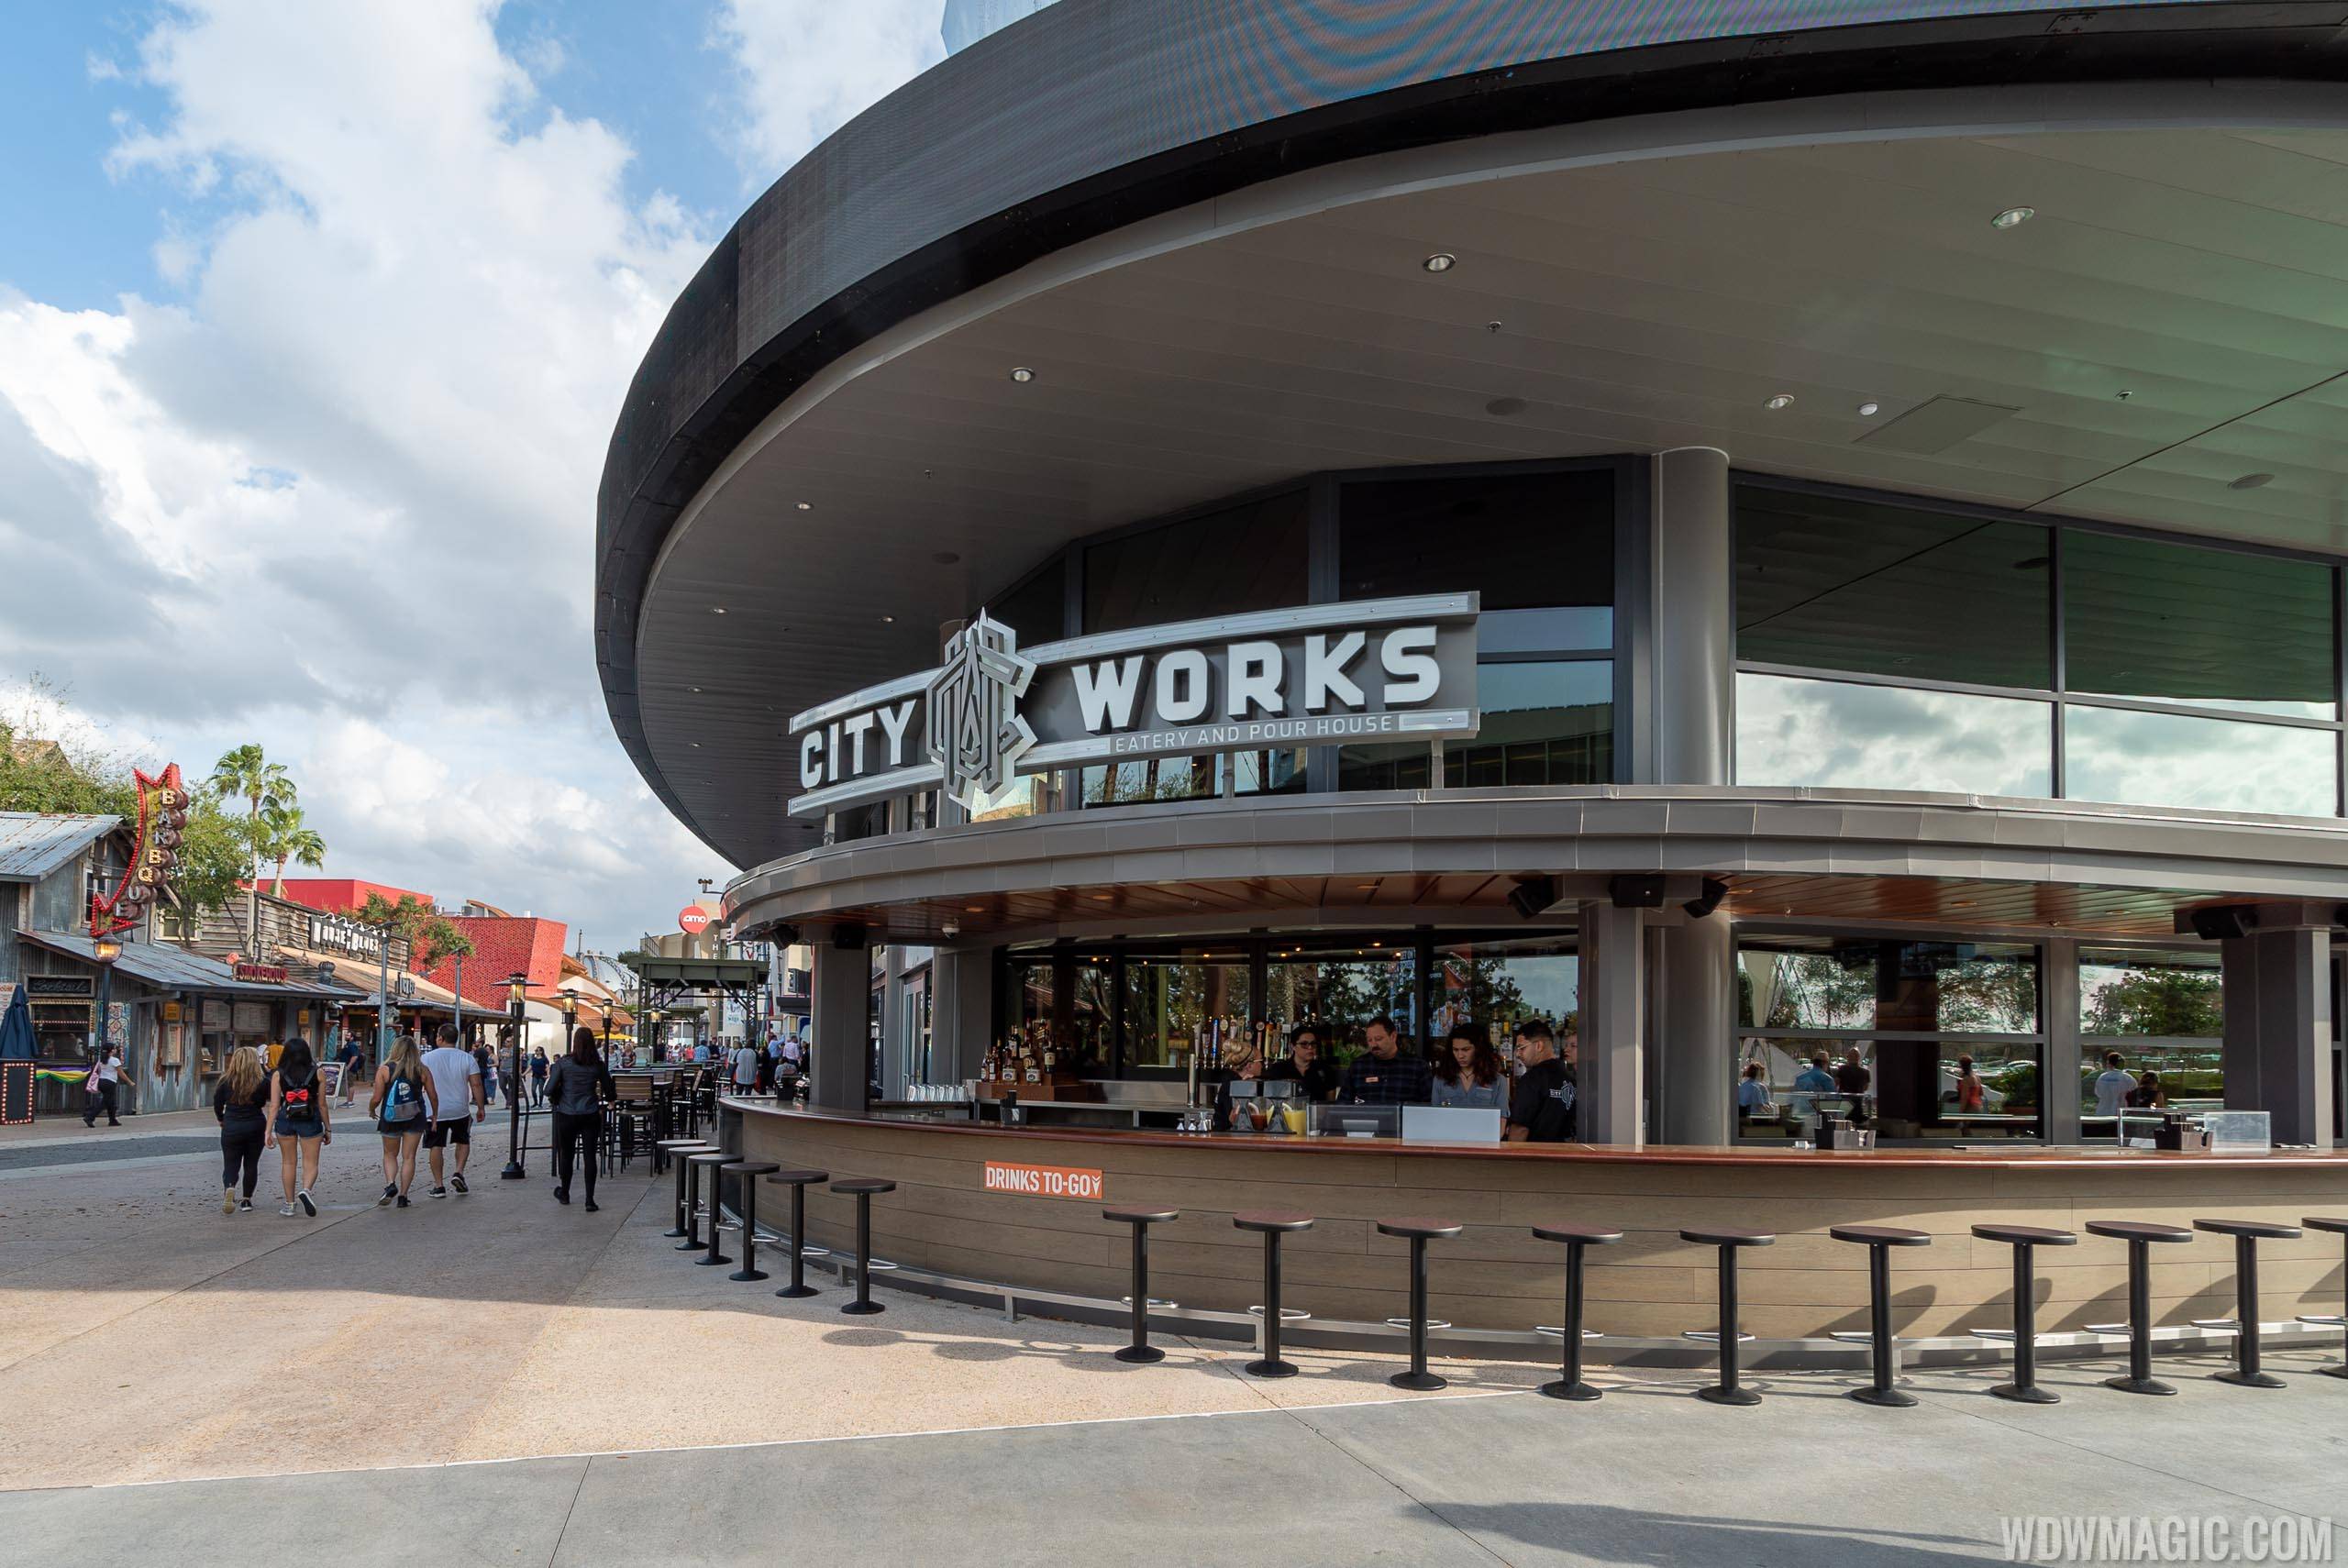 City Works Disney Springs offers two outdoor bars